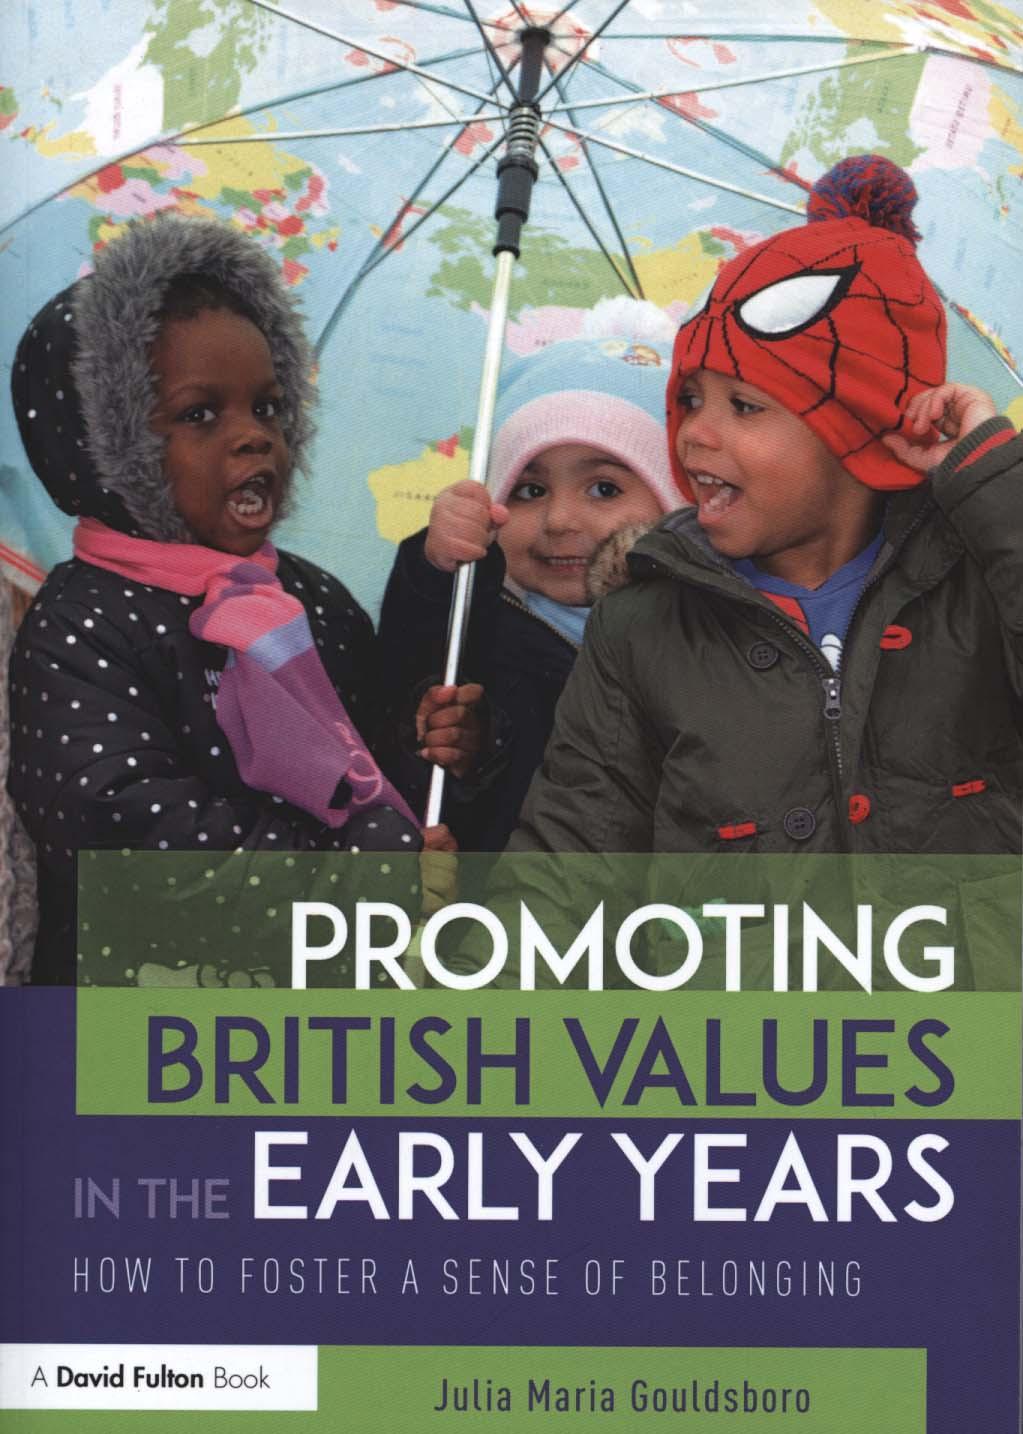 Promoting British Values in the Early Years